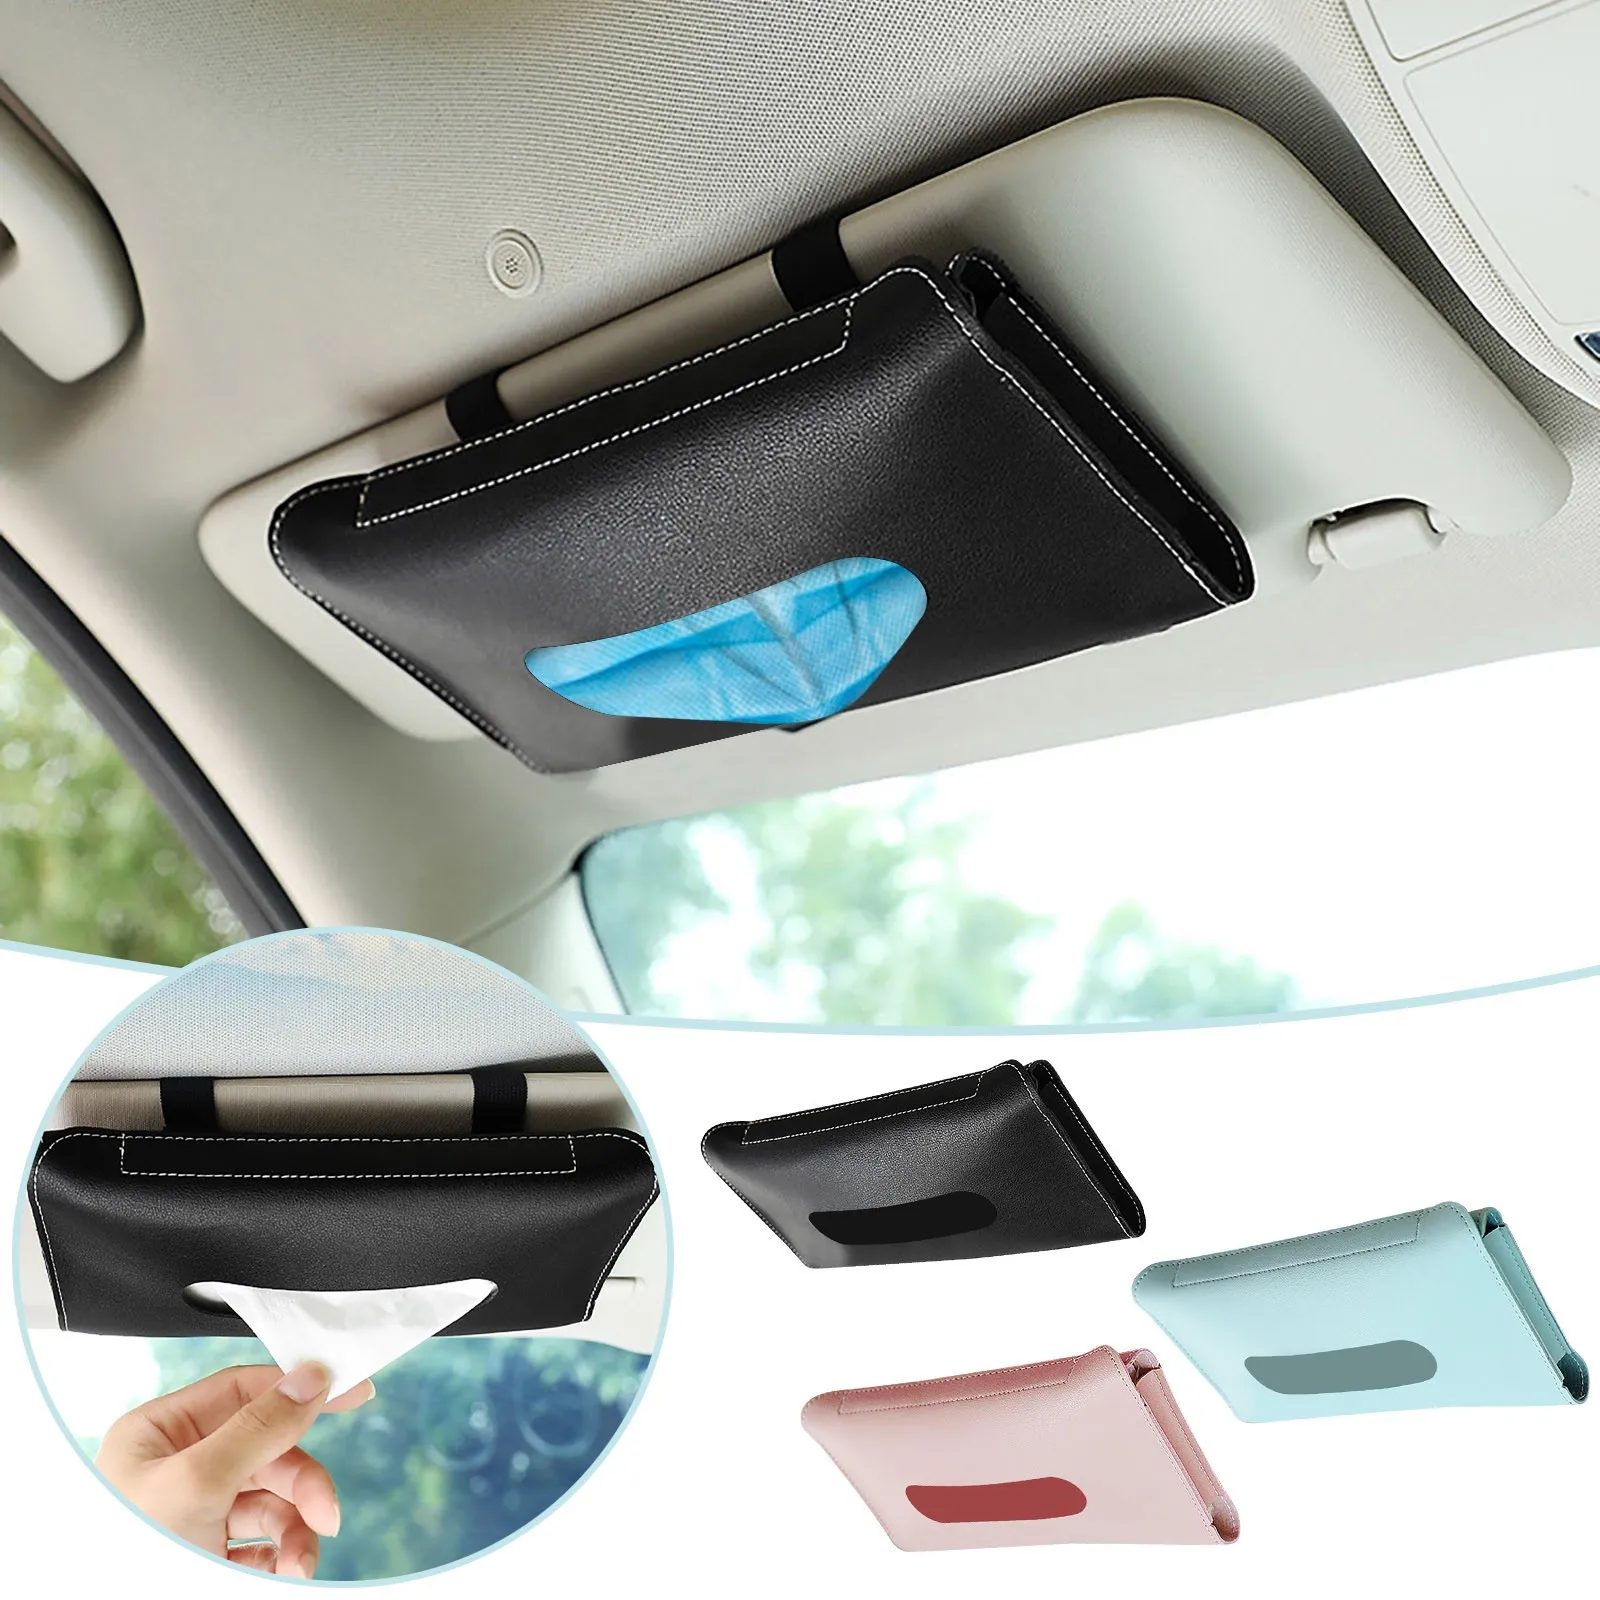 MoKo Car Sun Visor Tissue Box Holder Premium PU Leather Auto Foldable Hanging Paper Organizer Towel Napkin Pumping Box with Anti-Slip Silicone Pad and Magnetic Buckle for Car Home Office Use Black 